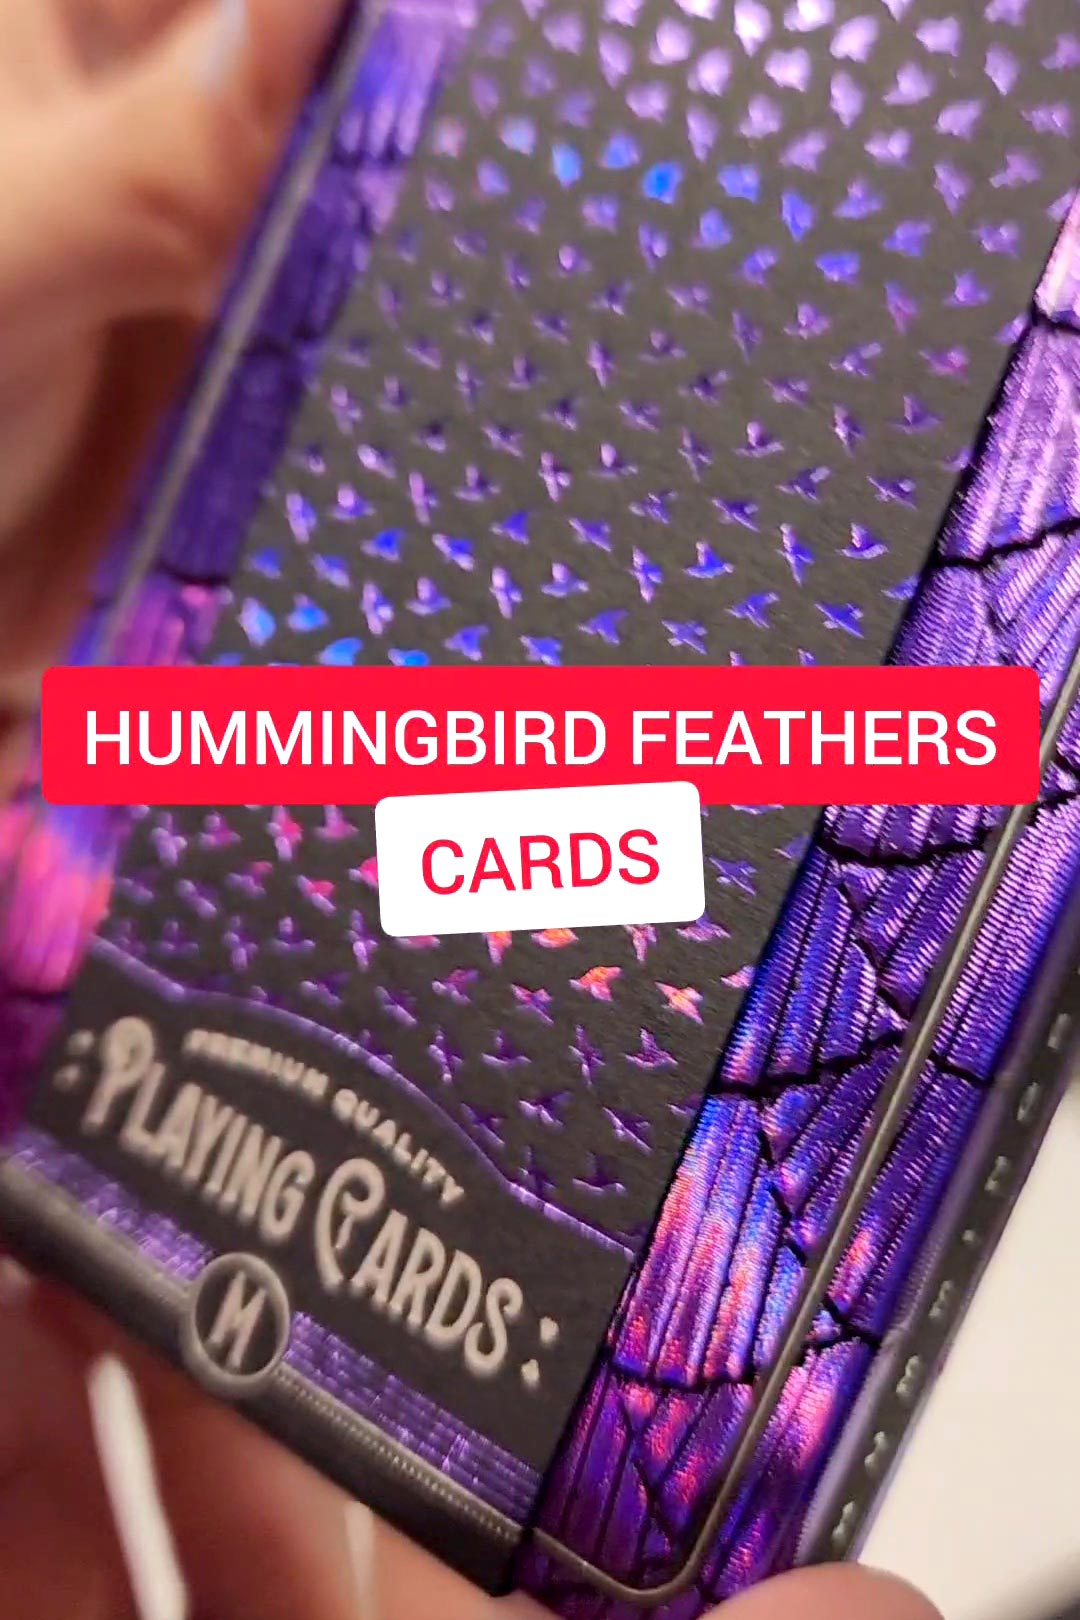 Hummingbird Feathers Playing Cards!